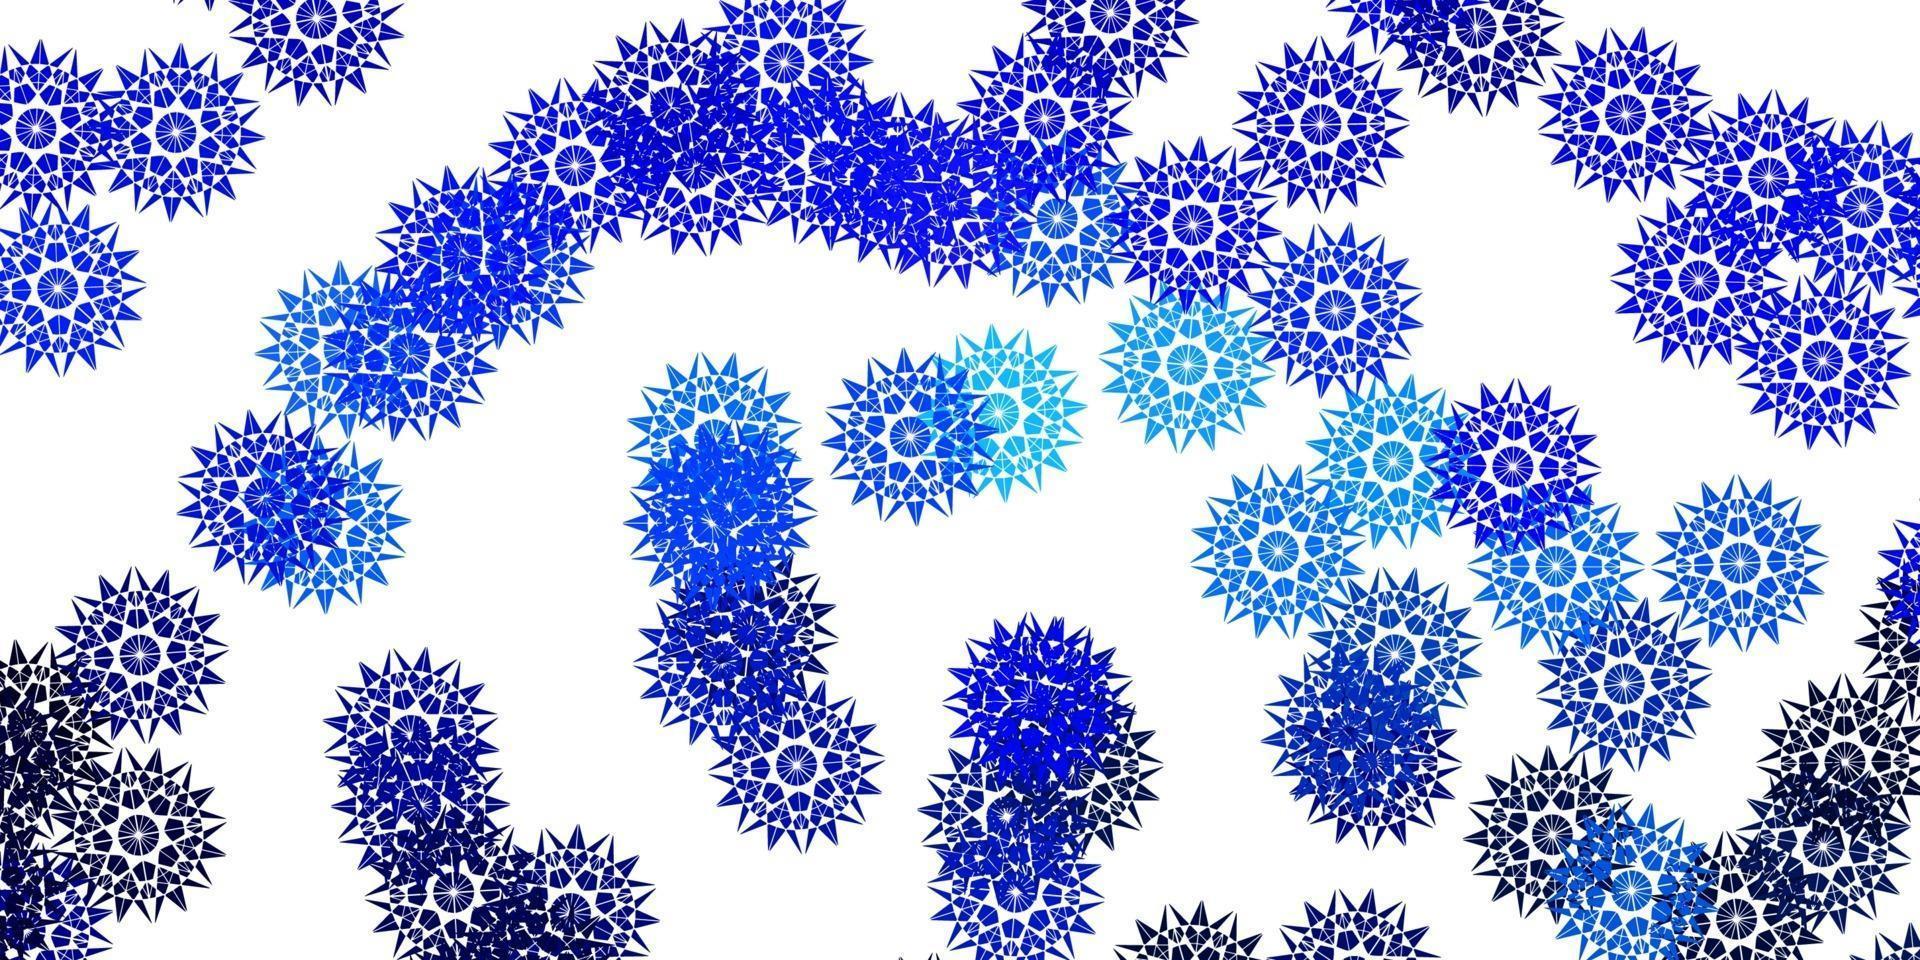 Light BLUE vector doodle background with flowers.